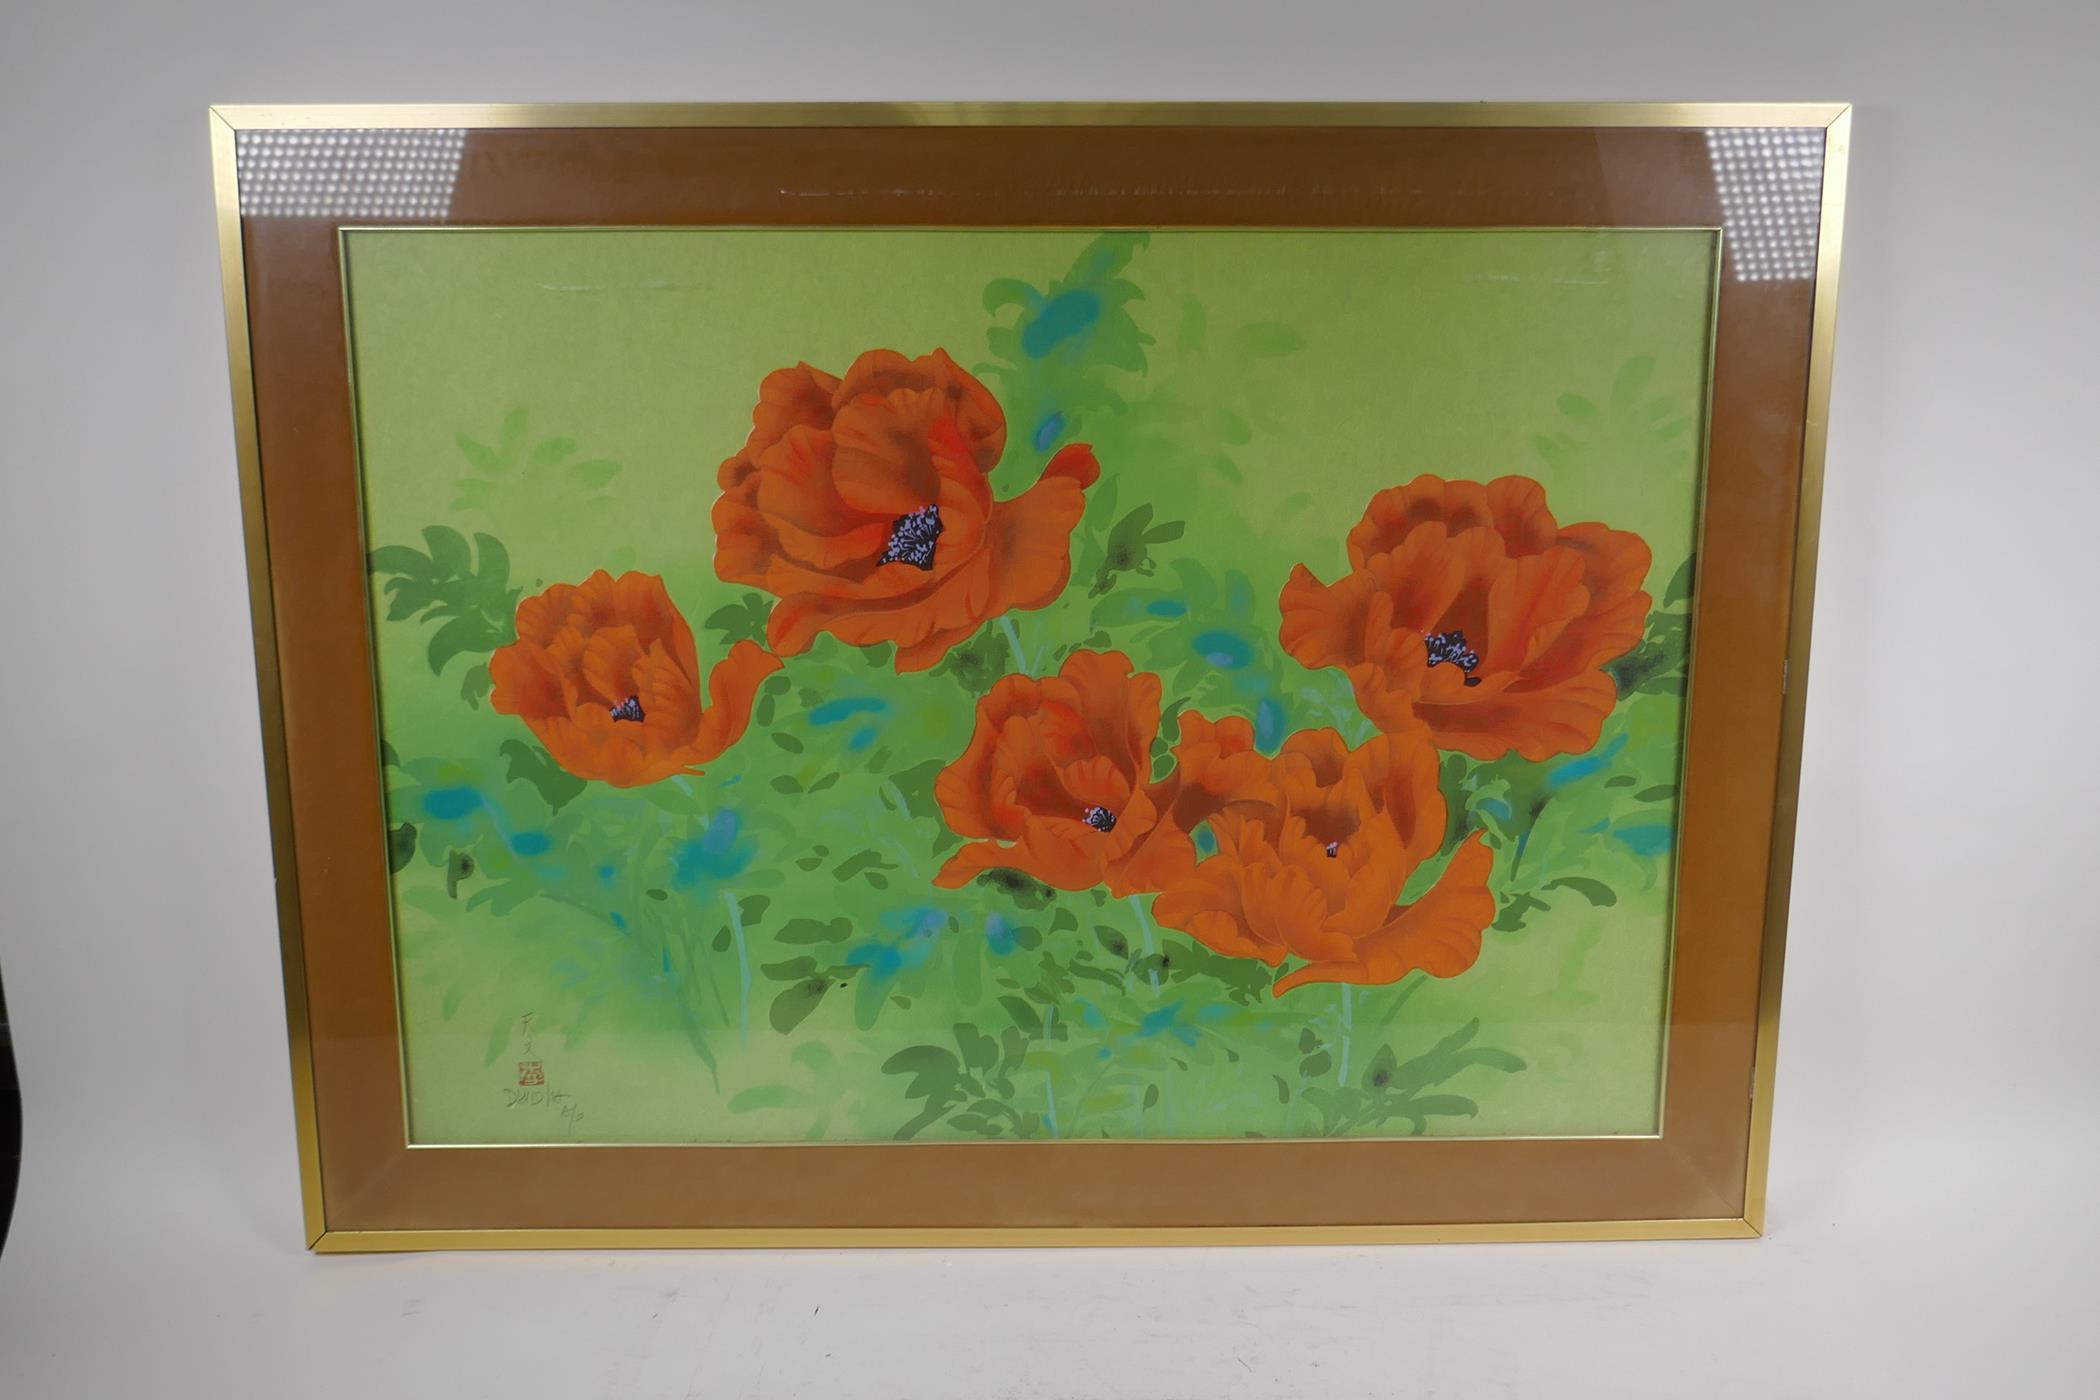 David Lee, Poppies, artist's proof screen print, signed in pencil and stamped with a seal, 73cm x - Image 2 of 3